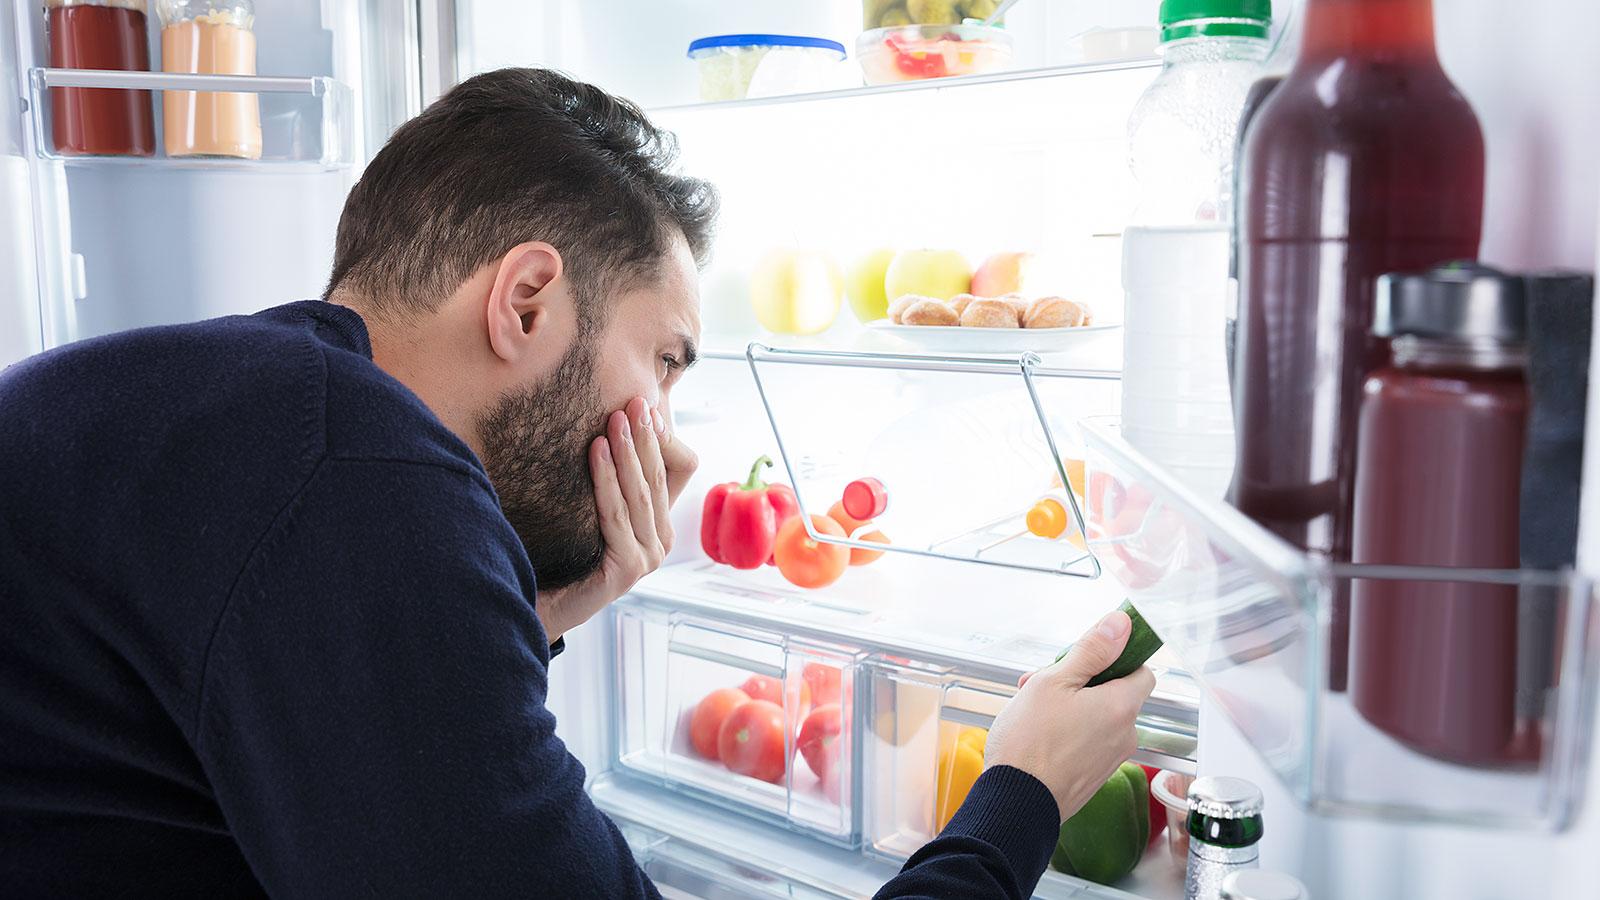 How To Remove Odor From Fridge?